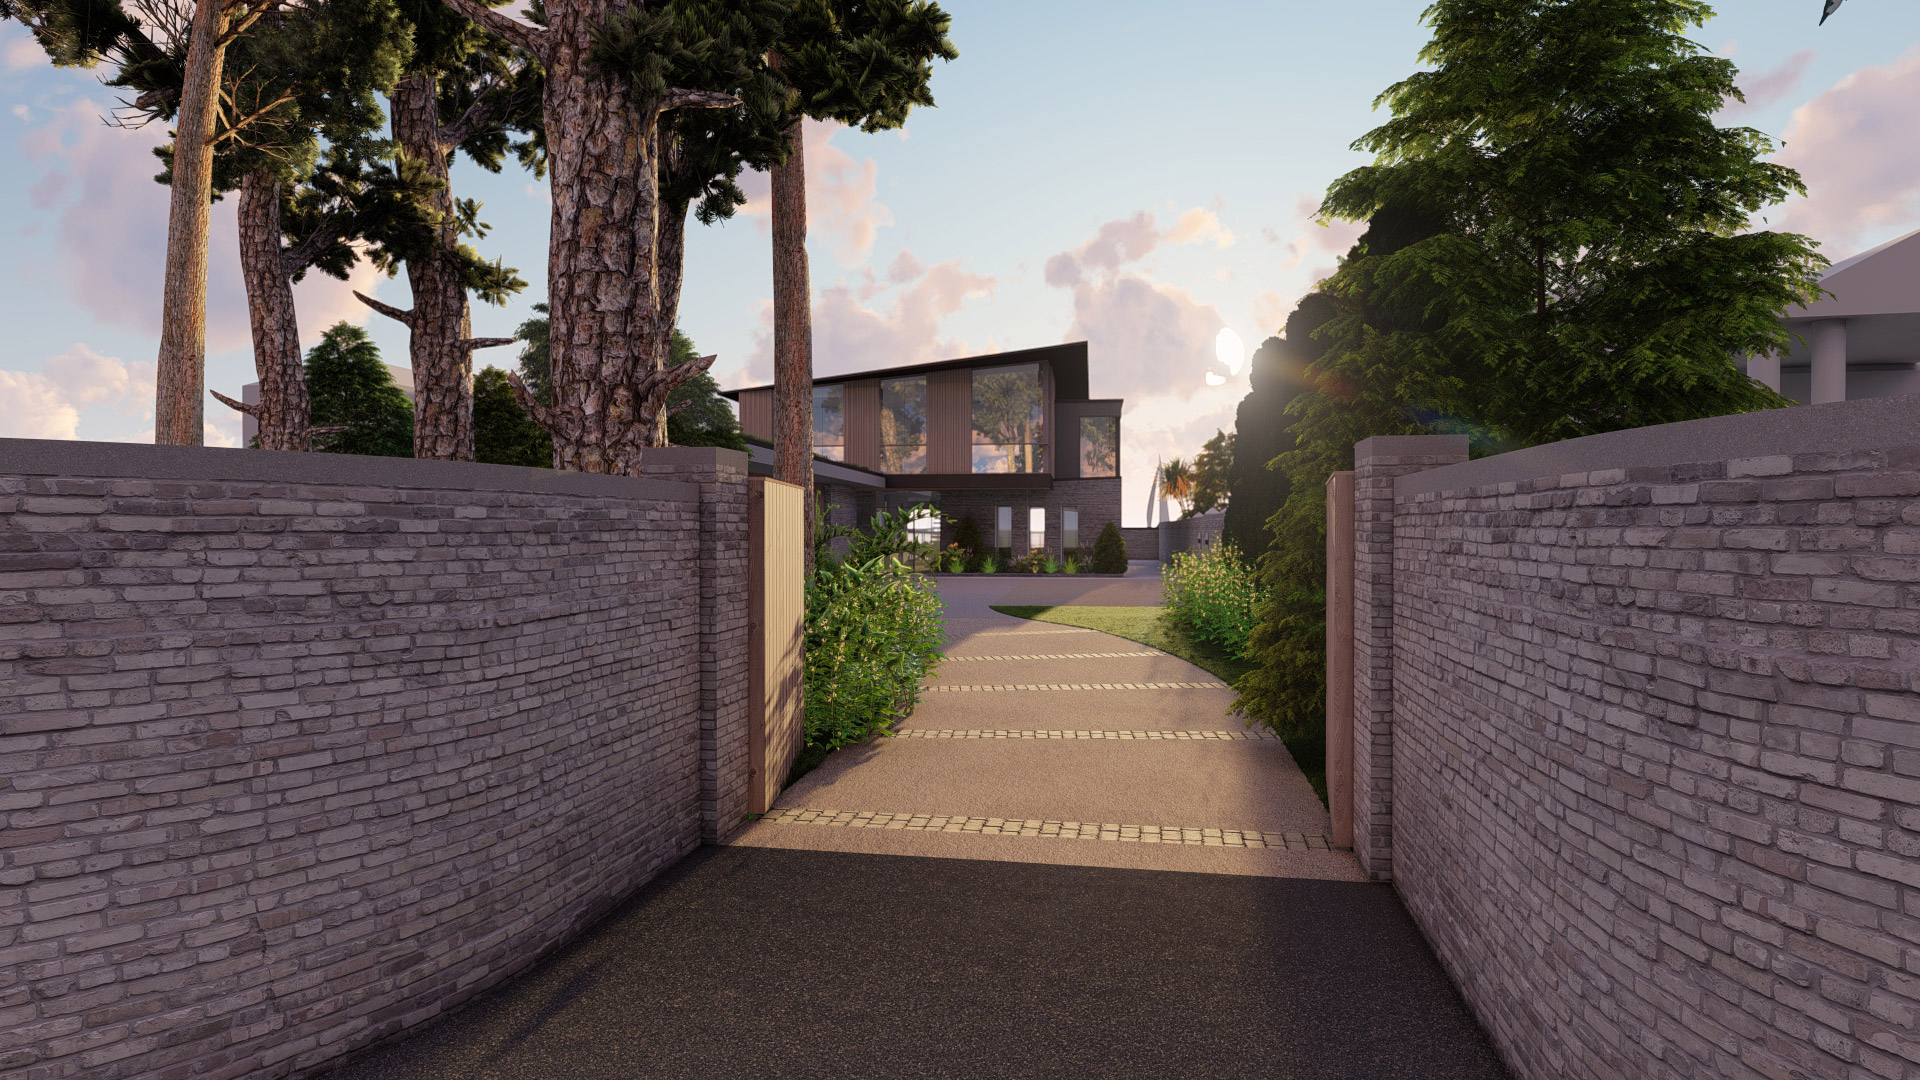 visual of entrance to modern stone and wood clad new build at dusk